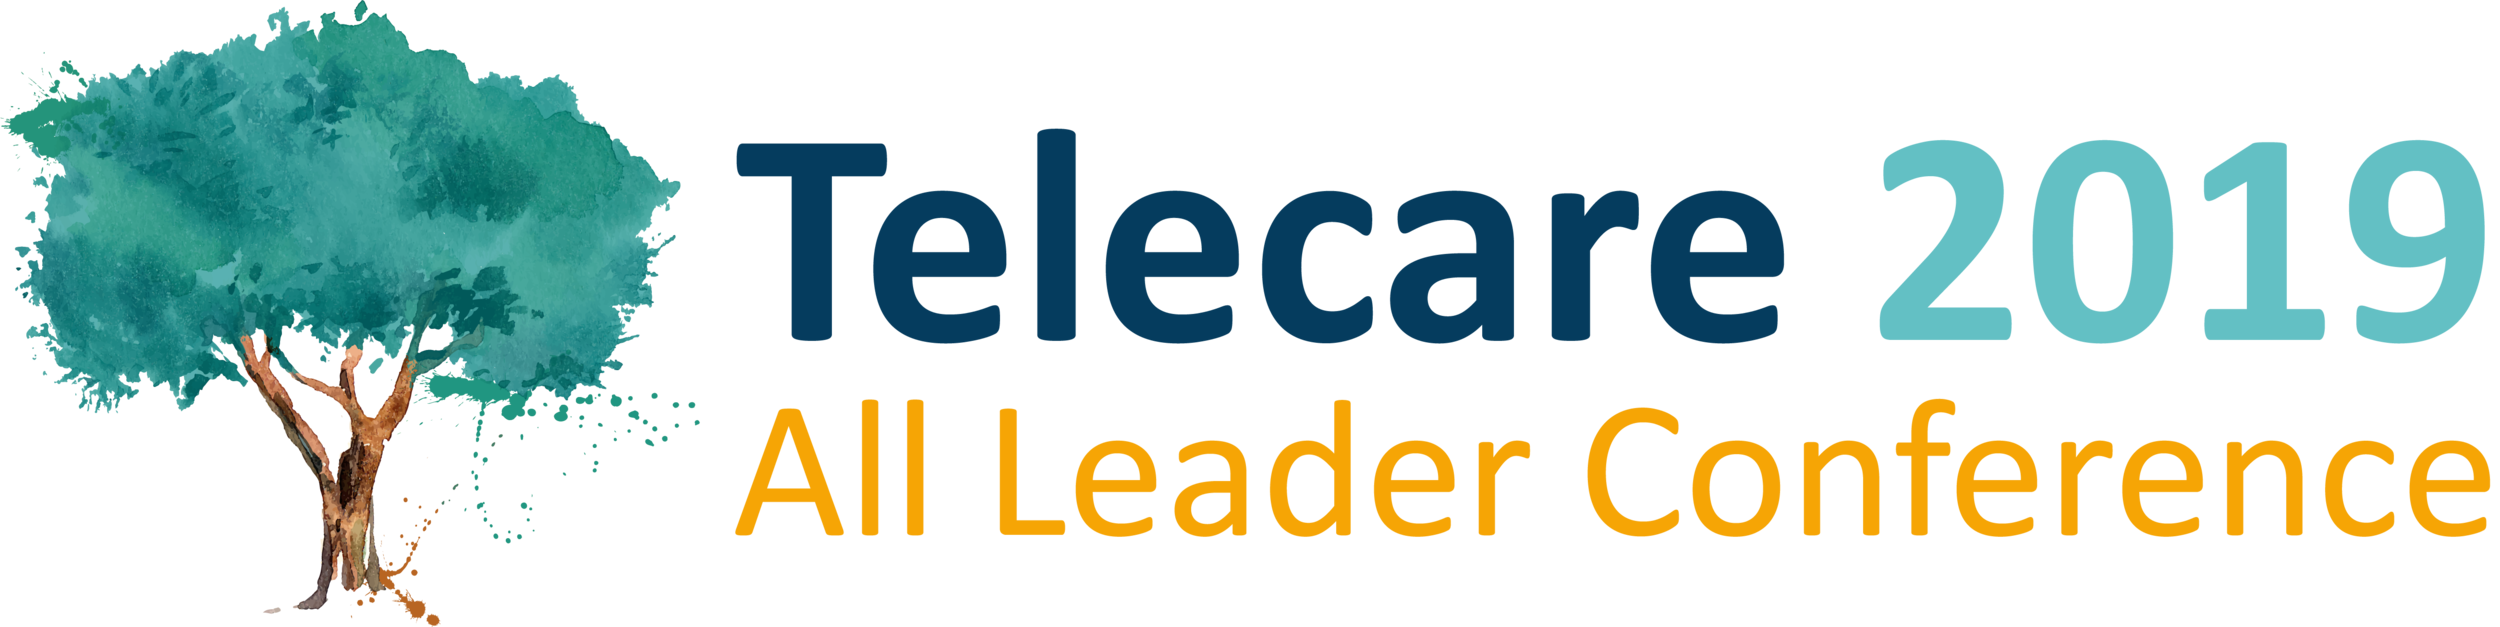 2019 All Leader Conference Logo_Horizontal-01.png